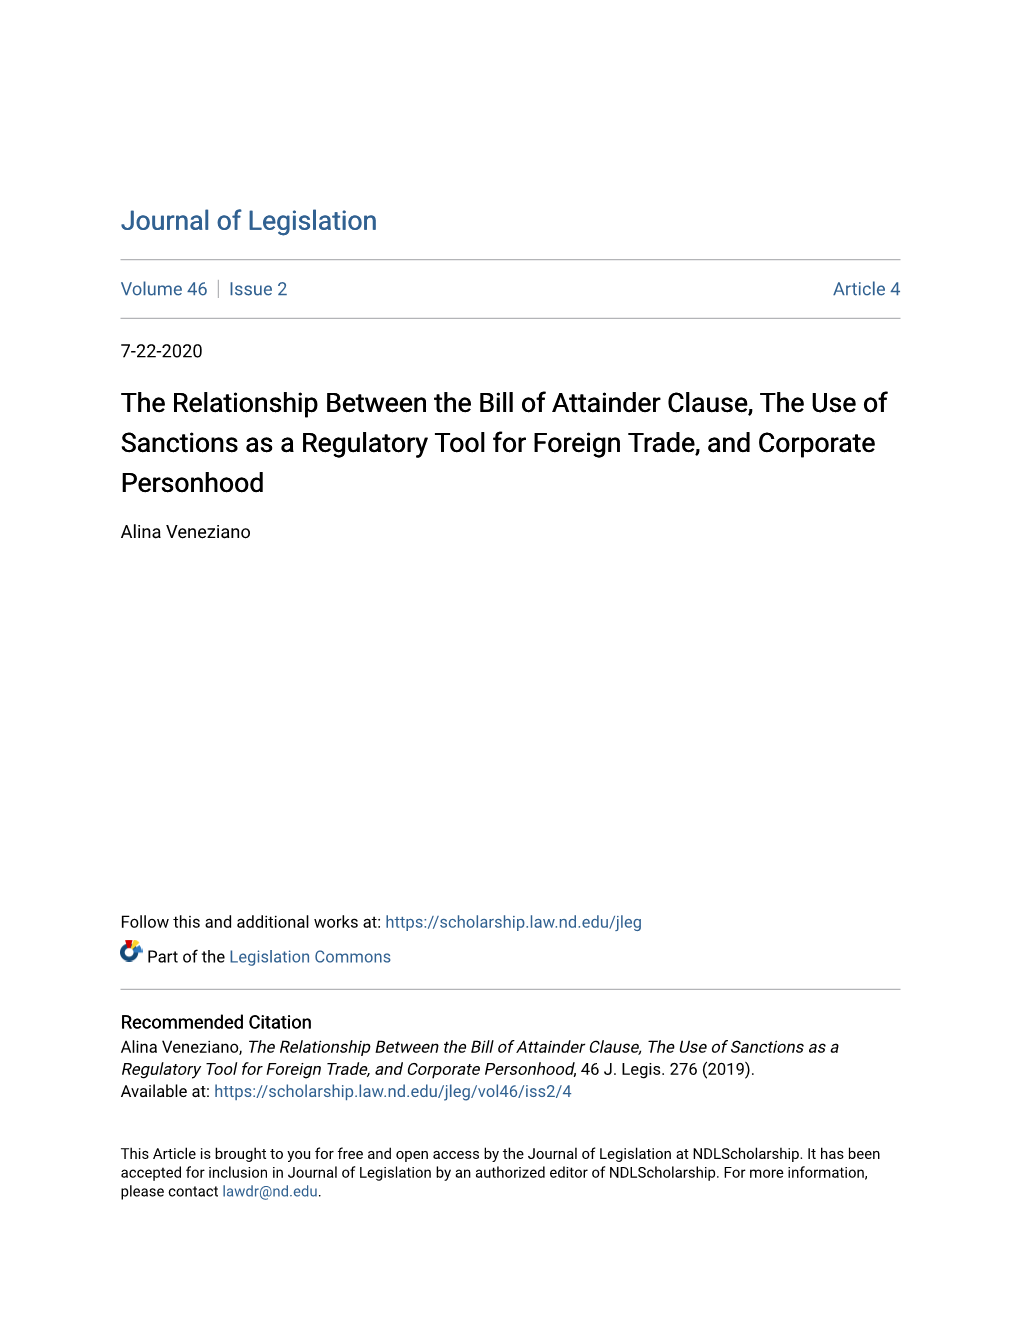 The Relationship Between the Bill of Attainder Clause, the Use of Sanctions As a Regulatory Tool for Foreign Trade, and Corporate Personhood